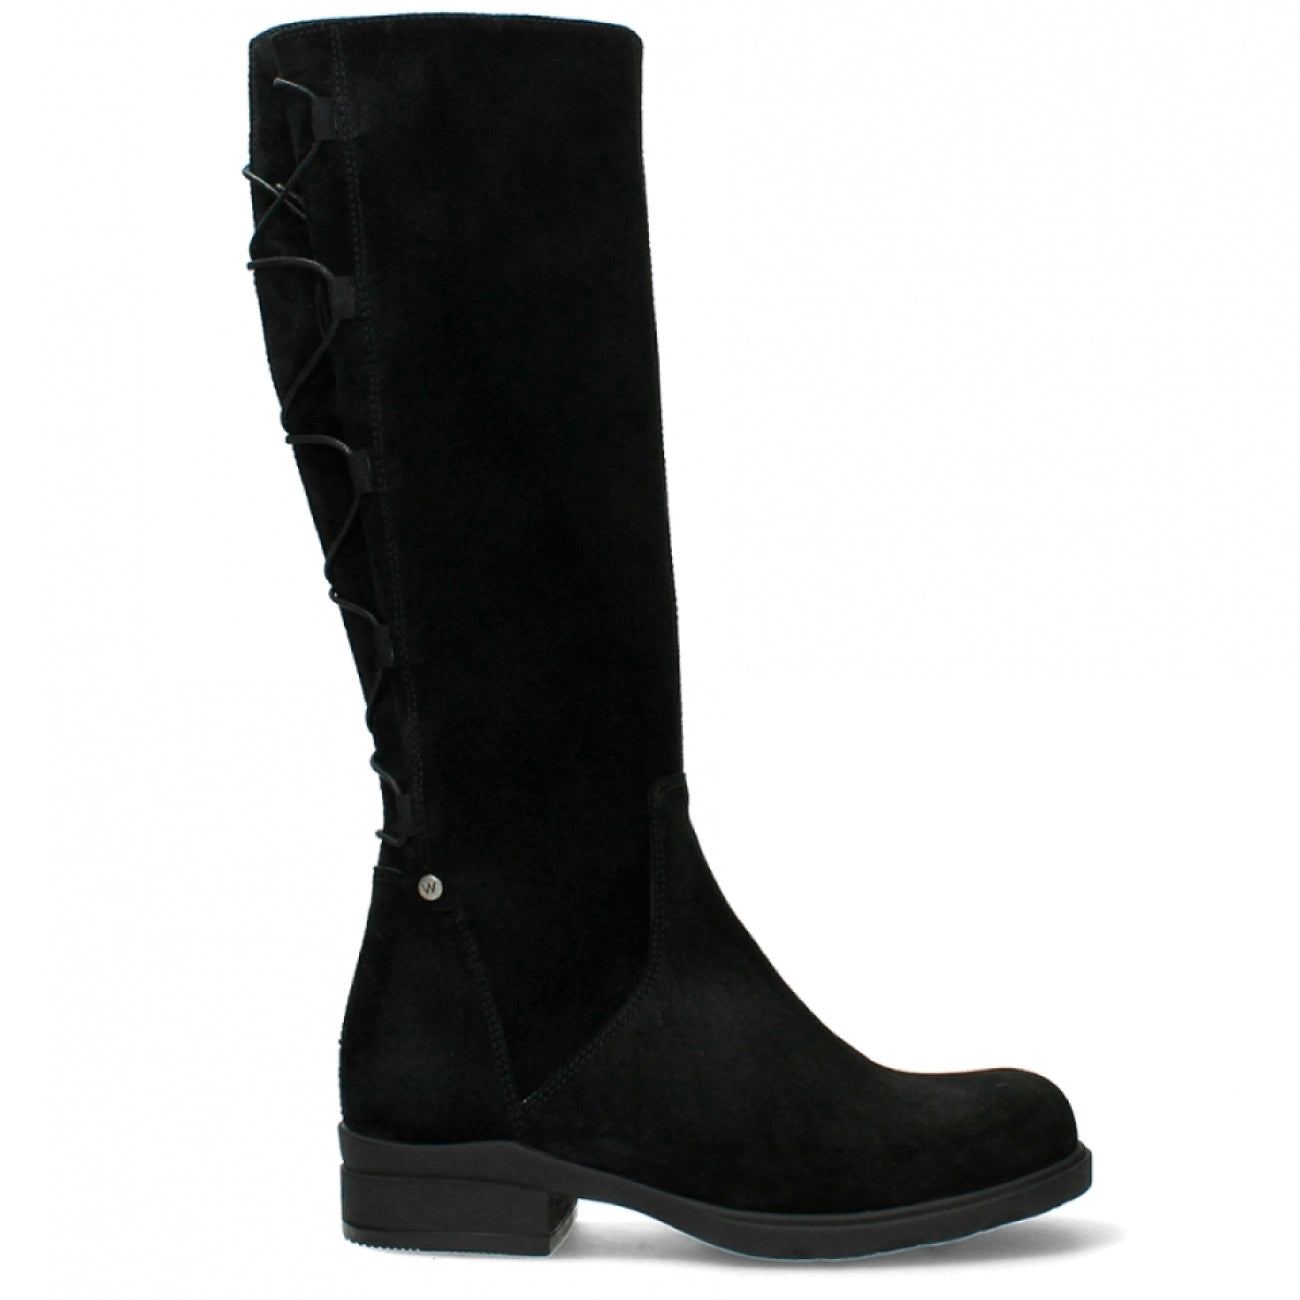 Wolky, Longview, Boots, Liverpool Suede, Black Boots Wolky Black 36 